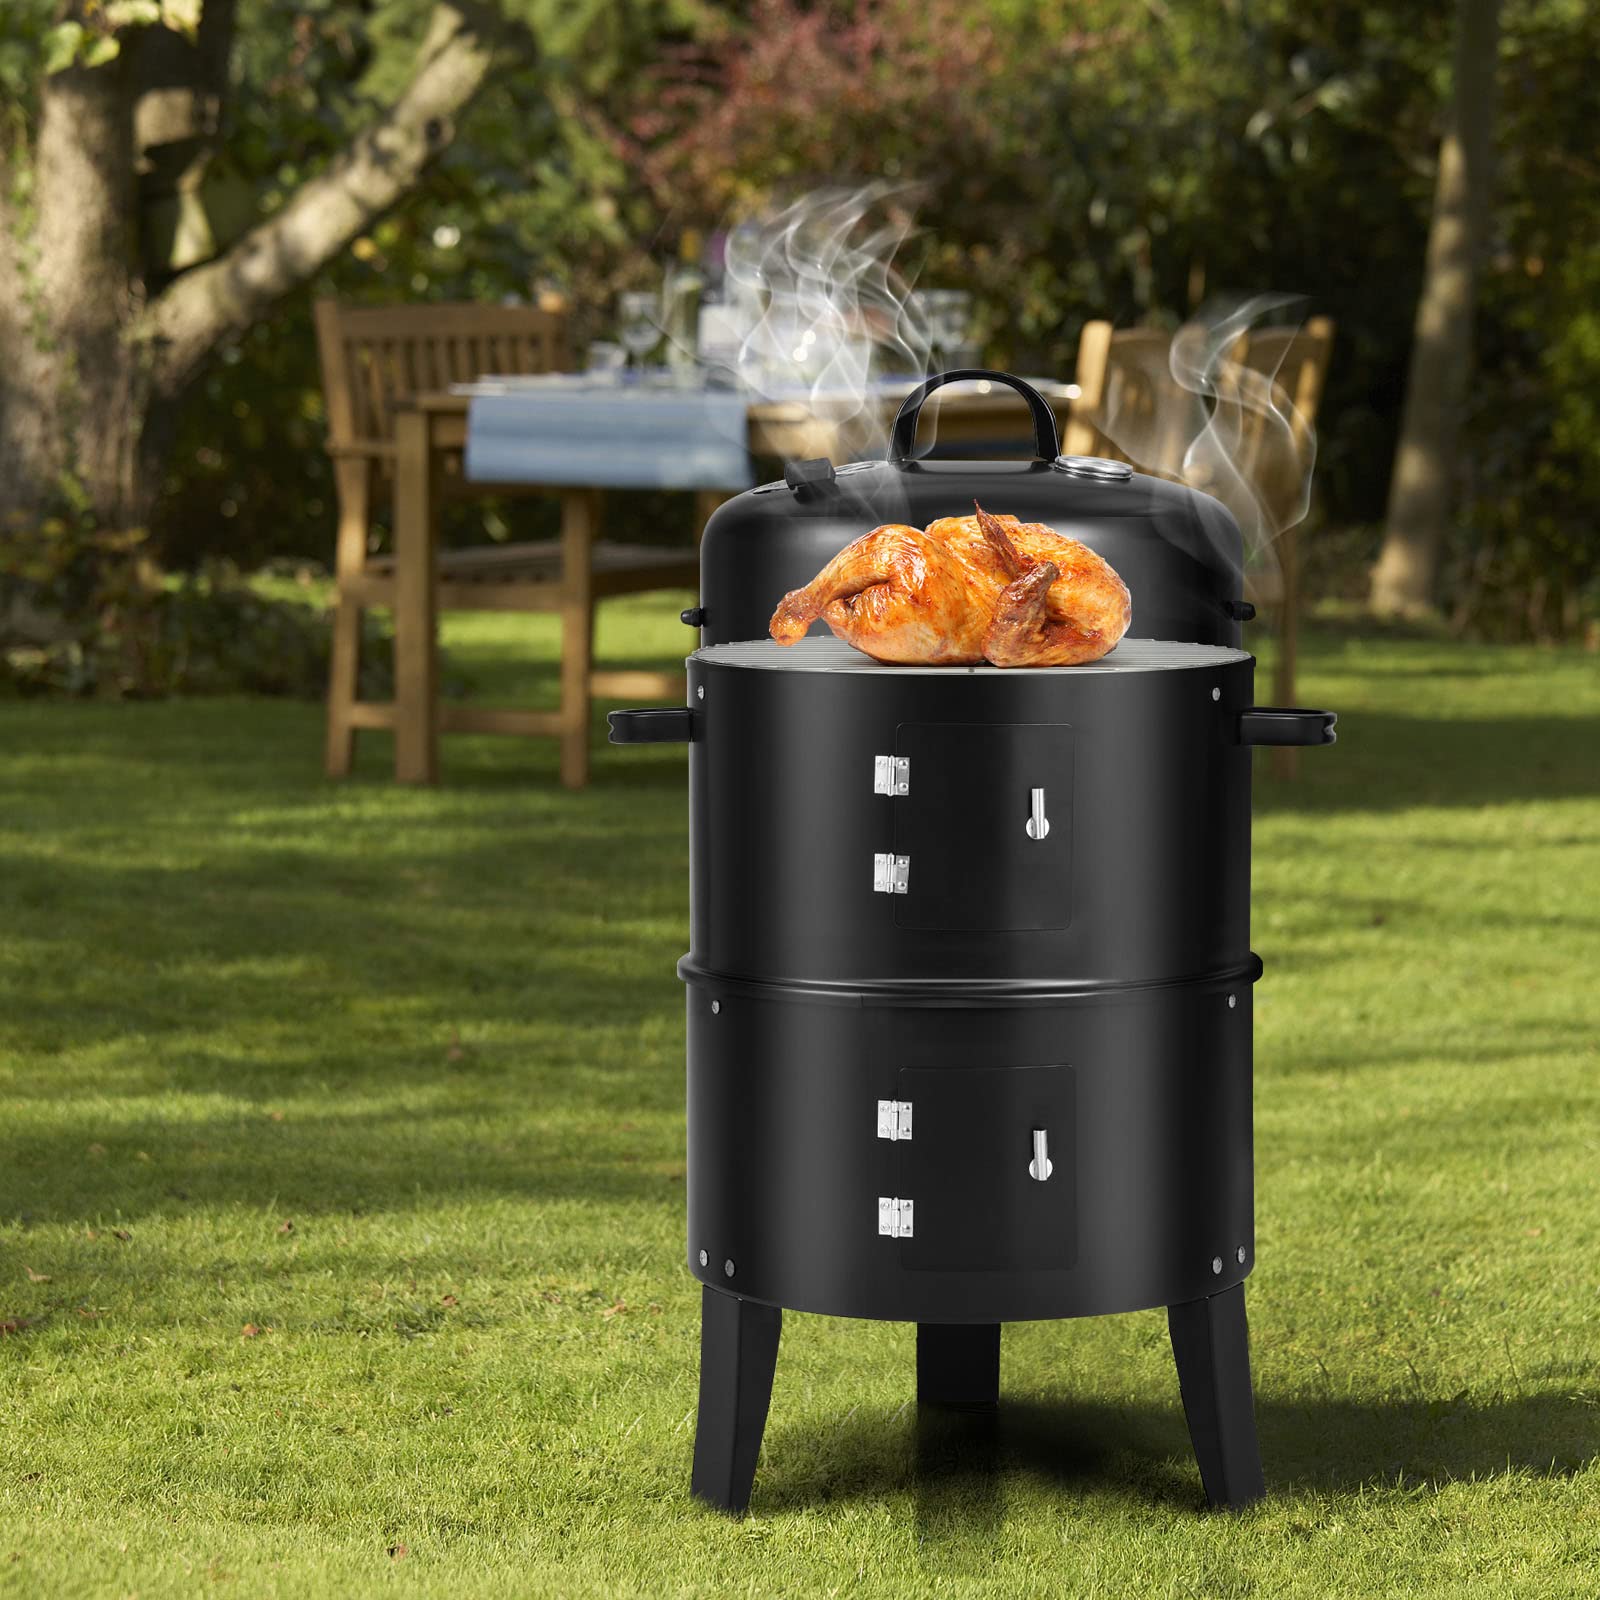 Giantex 3-in-1 Outdoor Smoker Grill with Smoker Combo